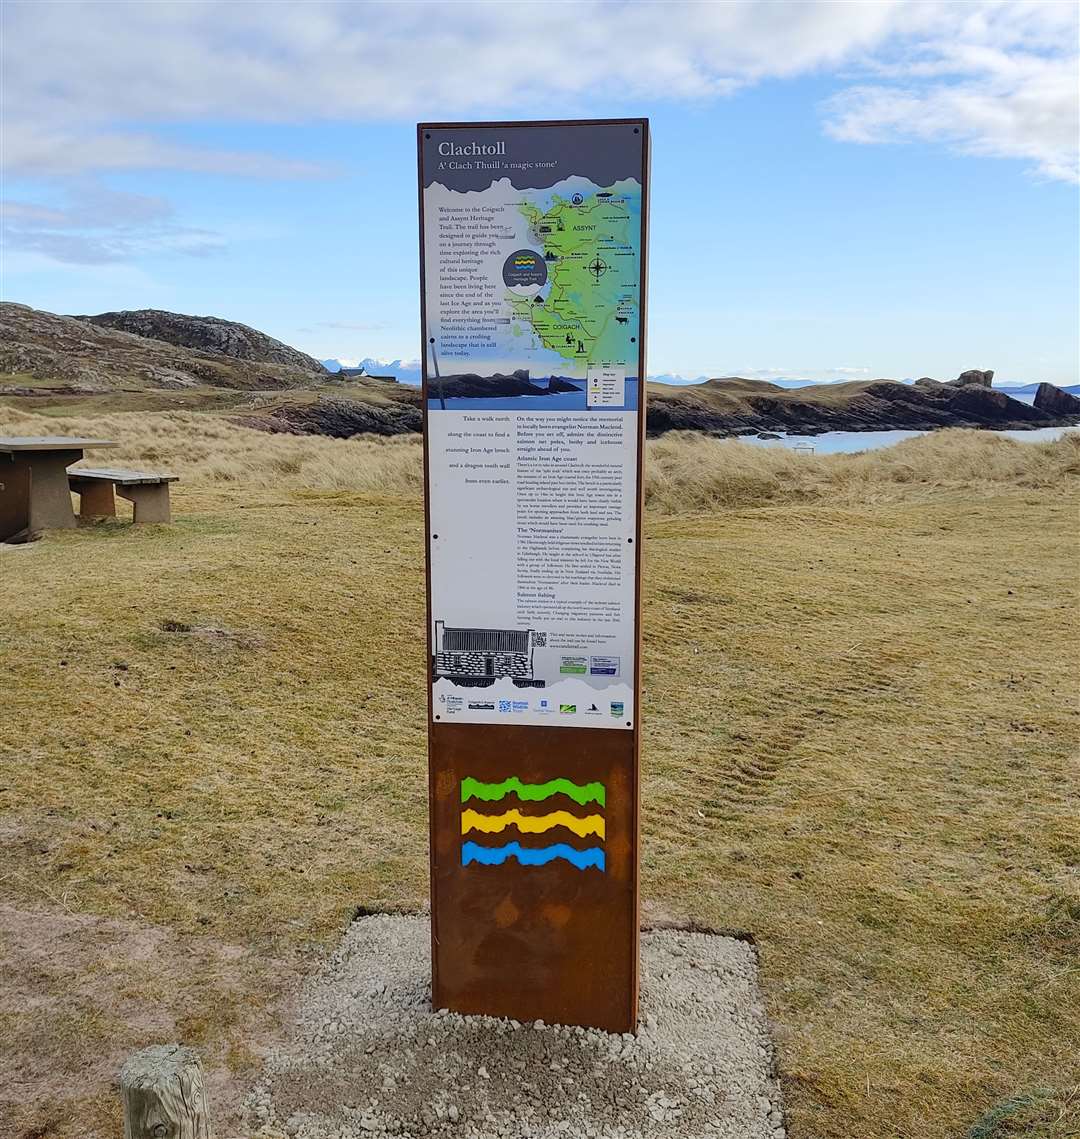 The monolith at Clachtoll.